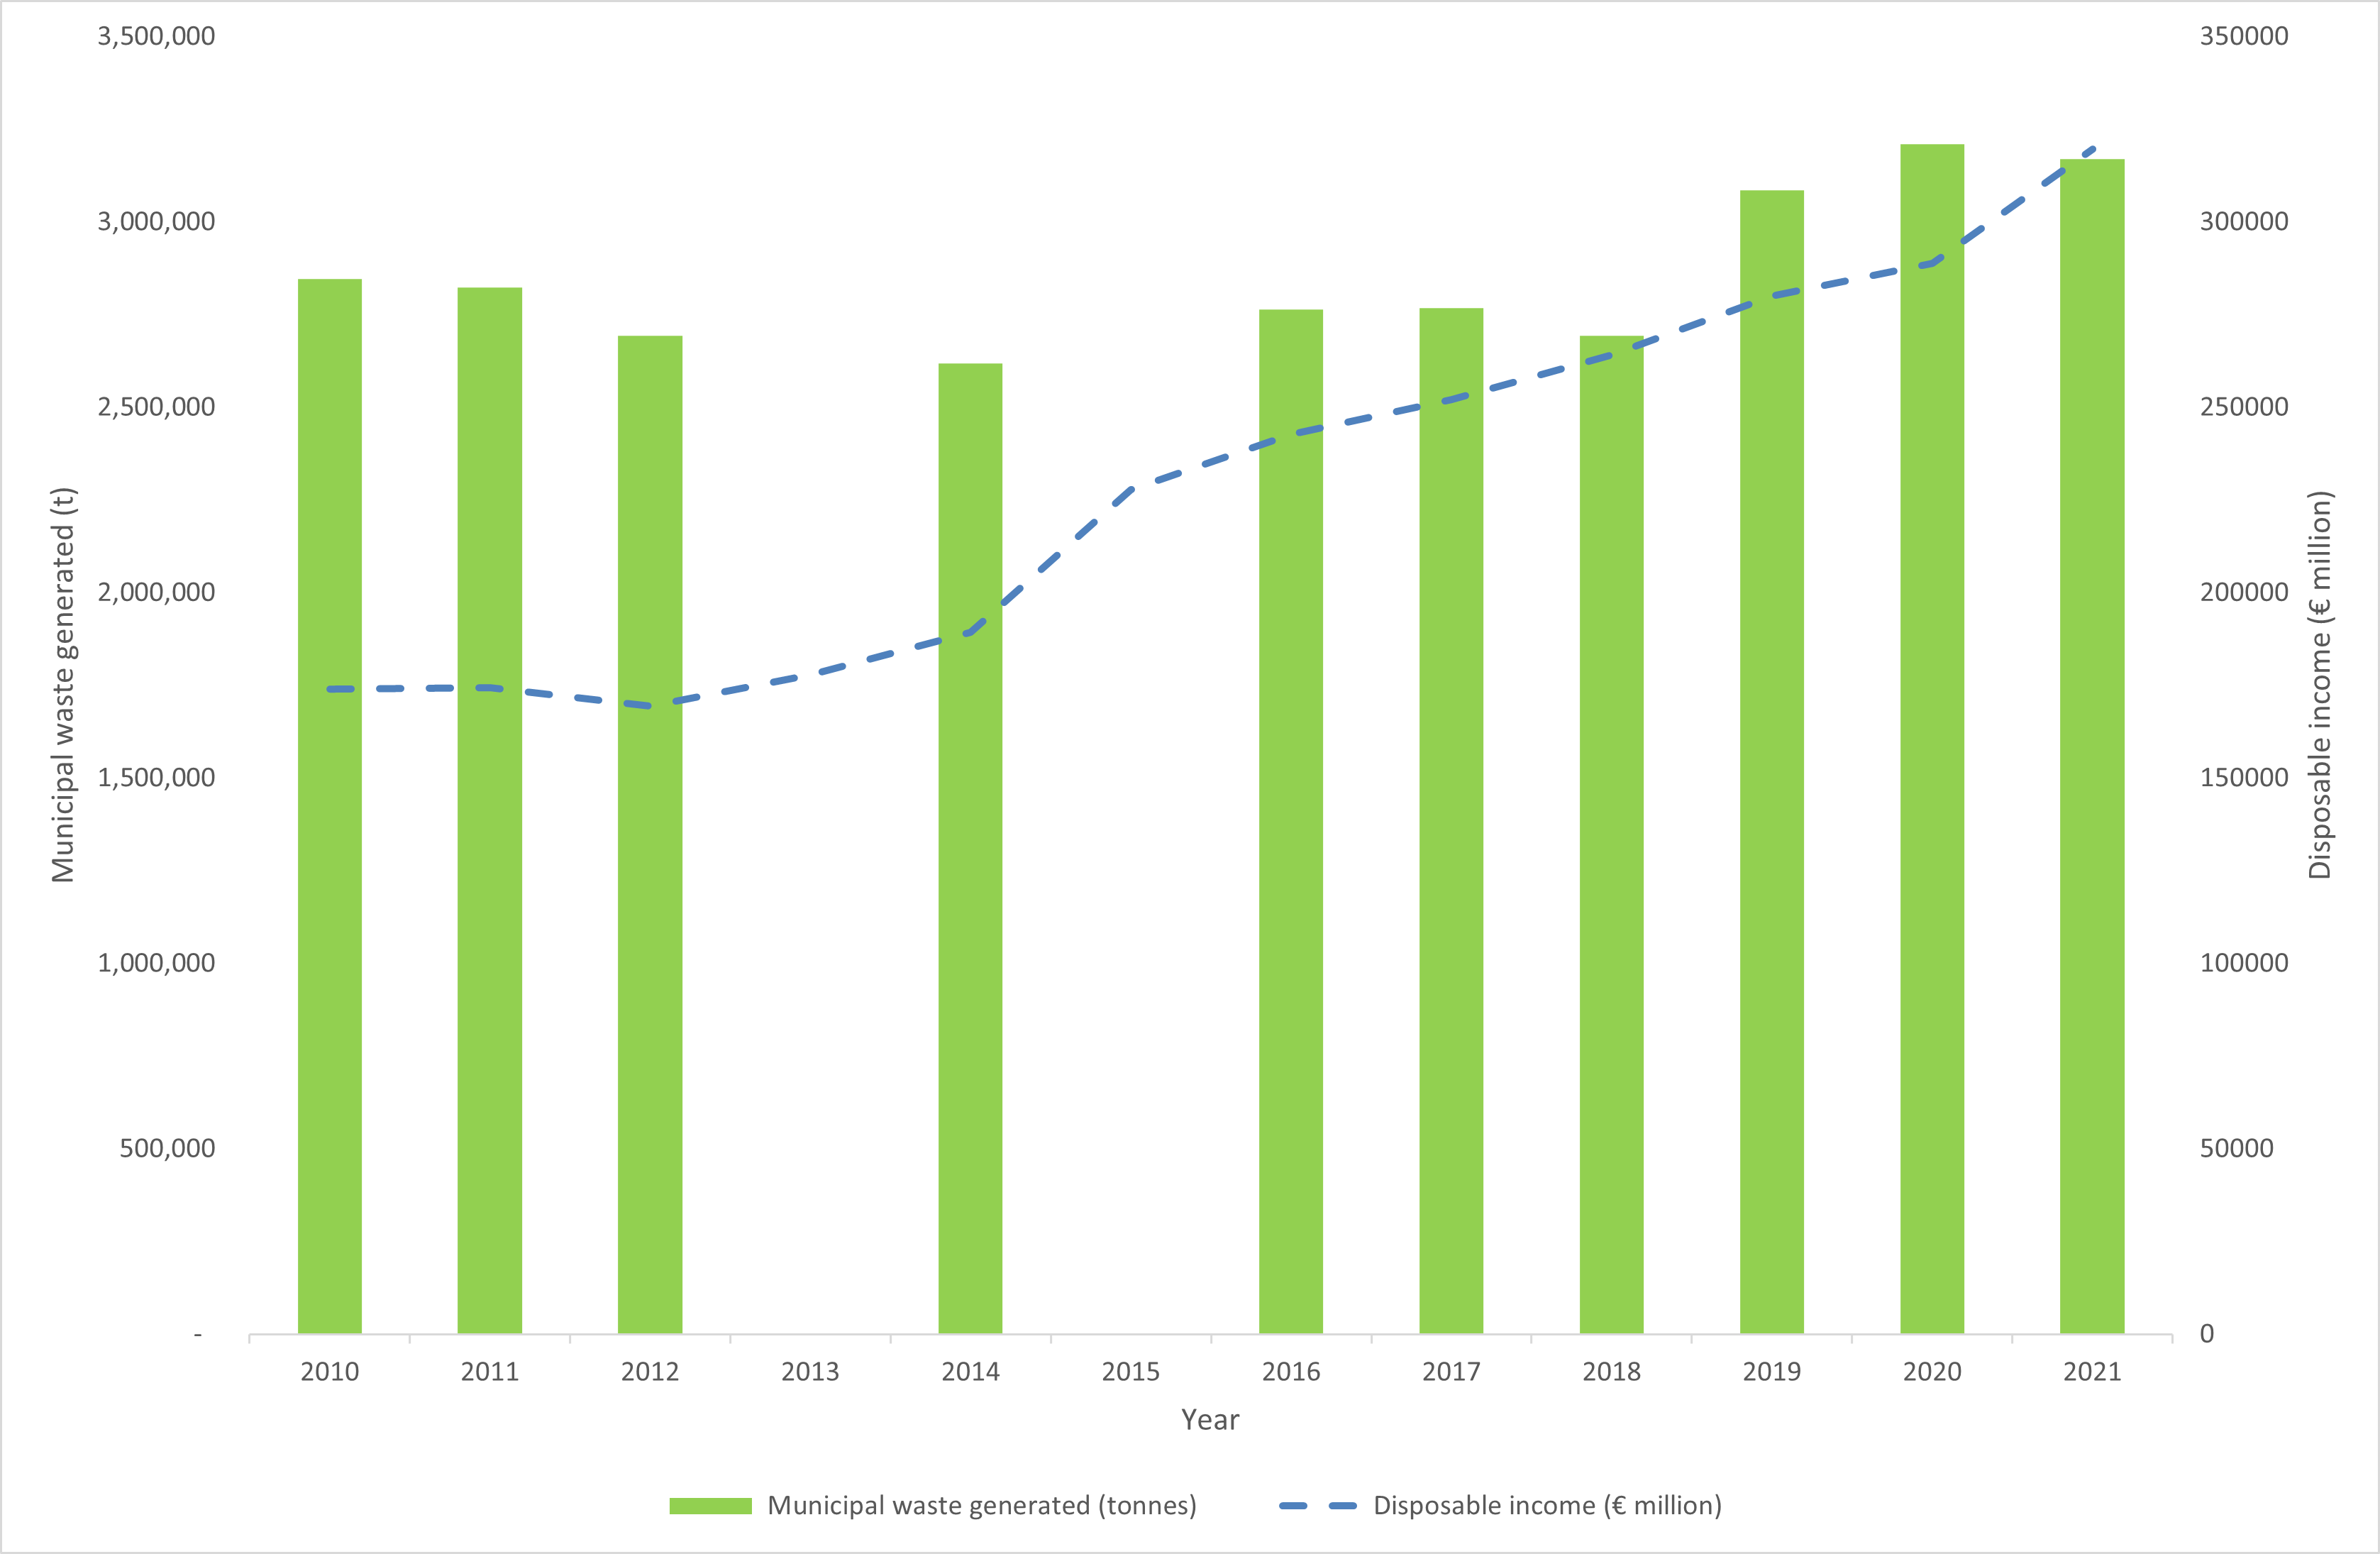 Graph showing tonnage of municipal waste generated from 2010 to 2021 and disposable income in millions